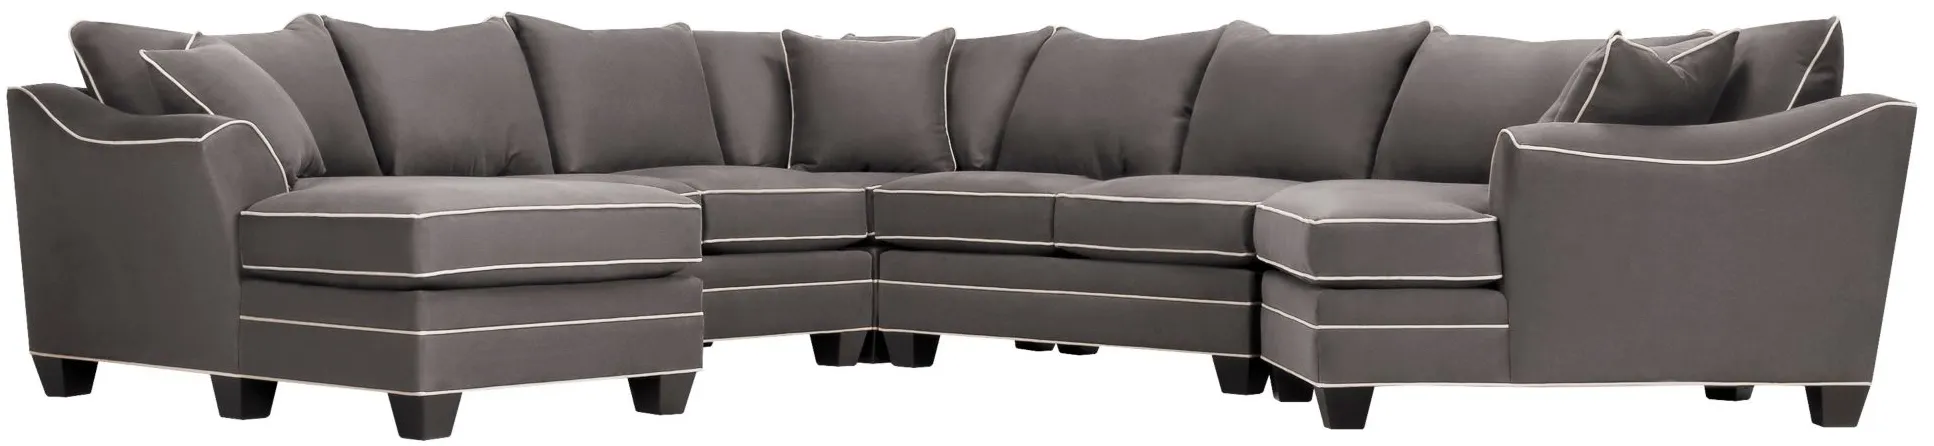 Foresthill 5-pc. Left Hand Facing Sectional Sofa in Suede So Soft Slate by H.M. Richards